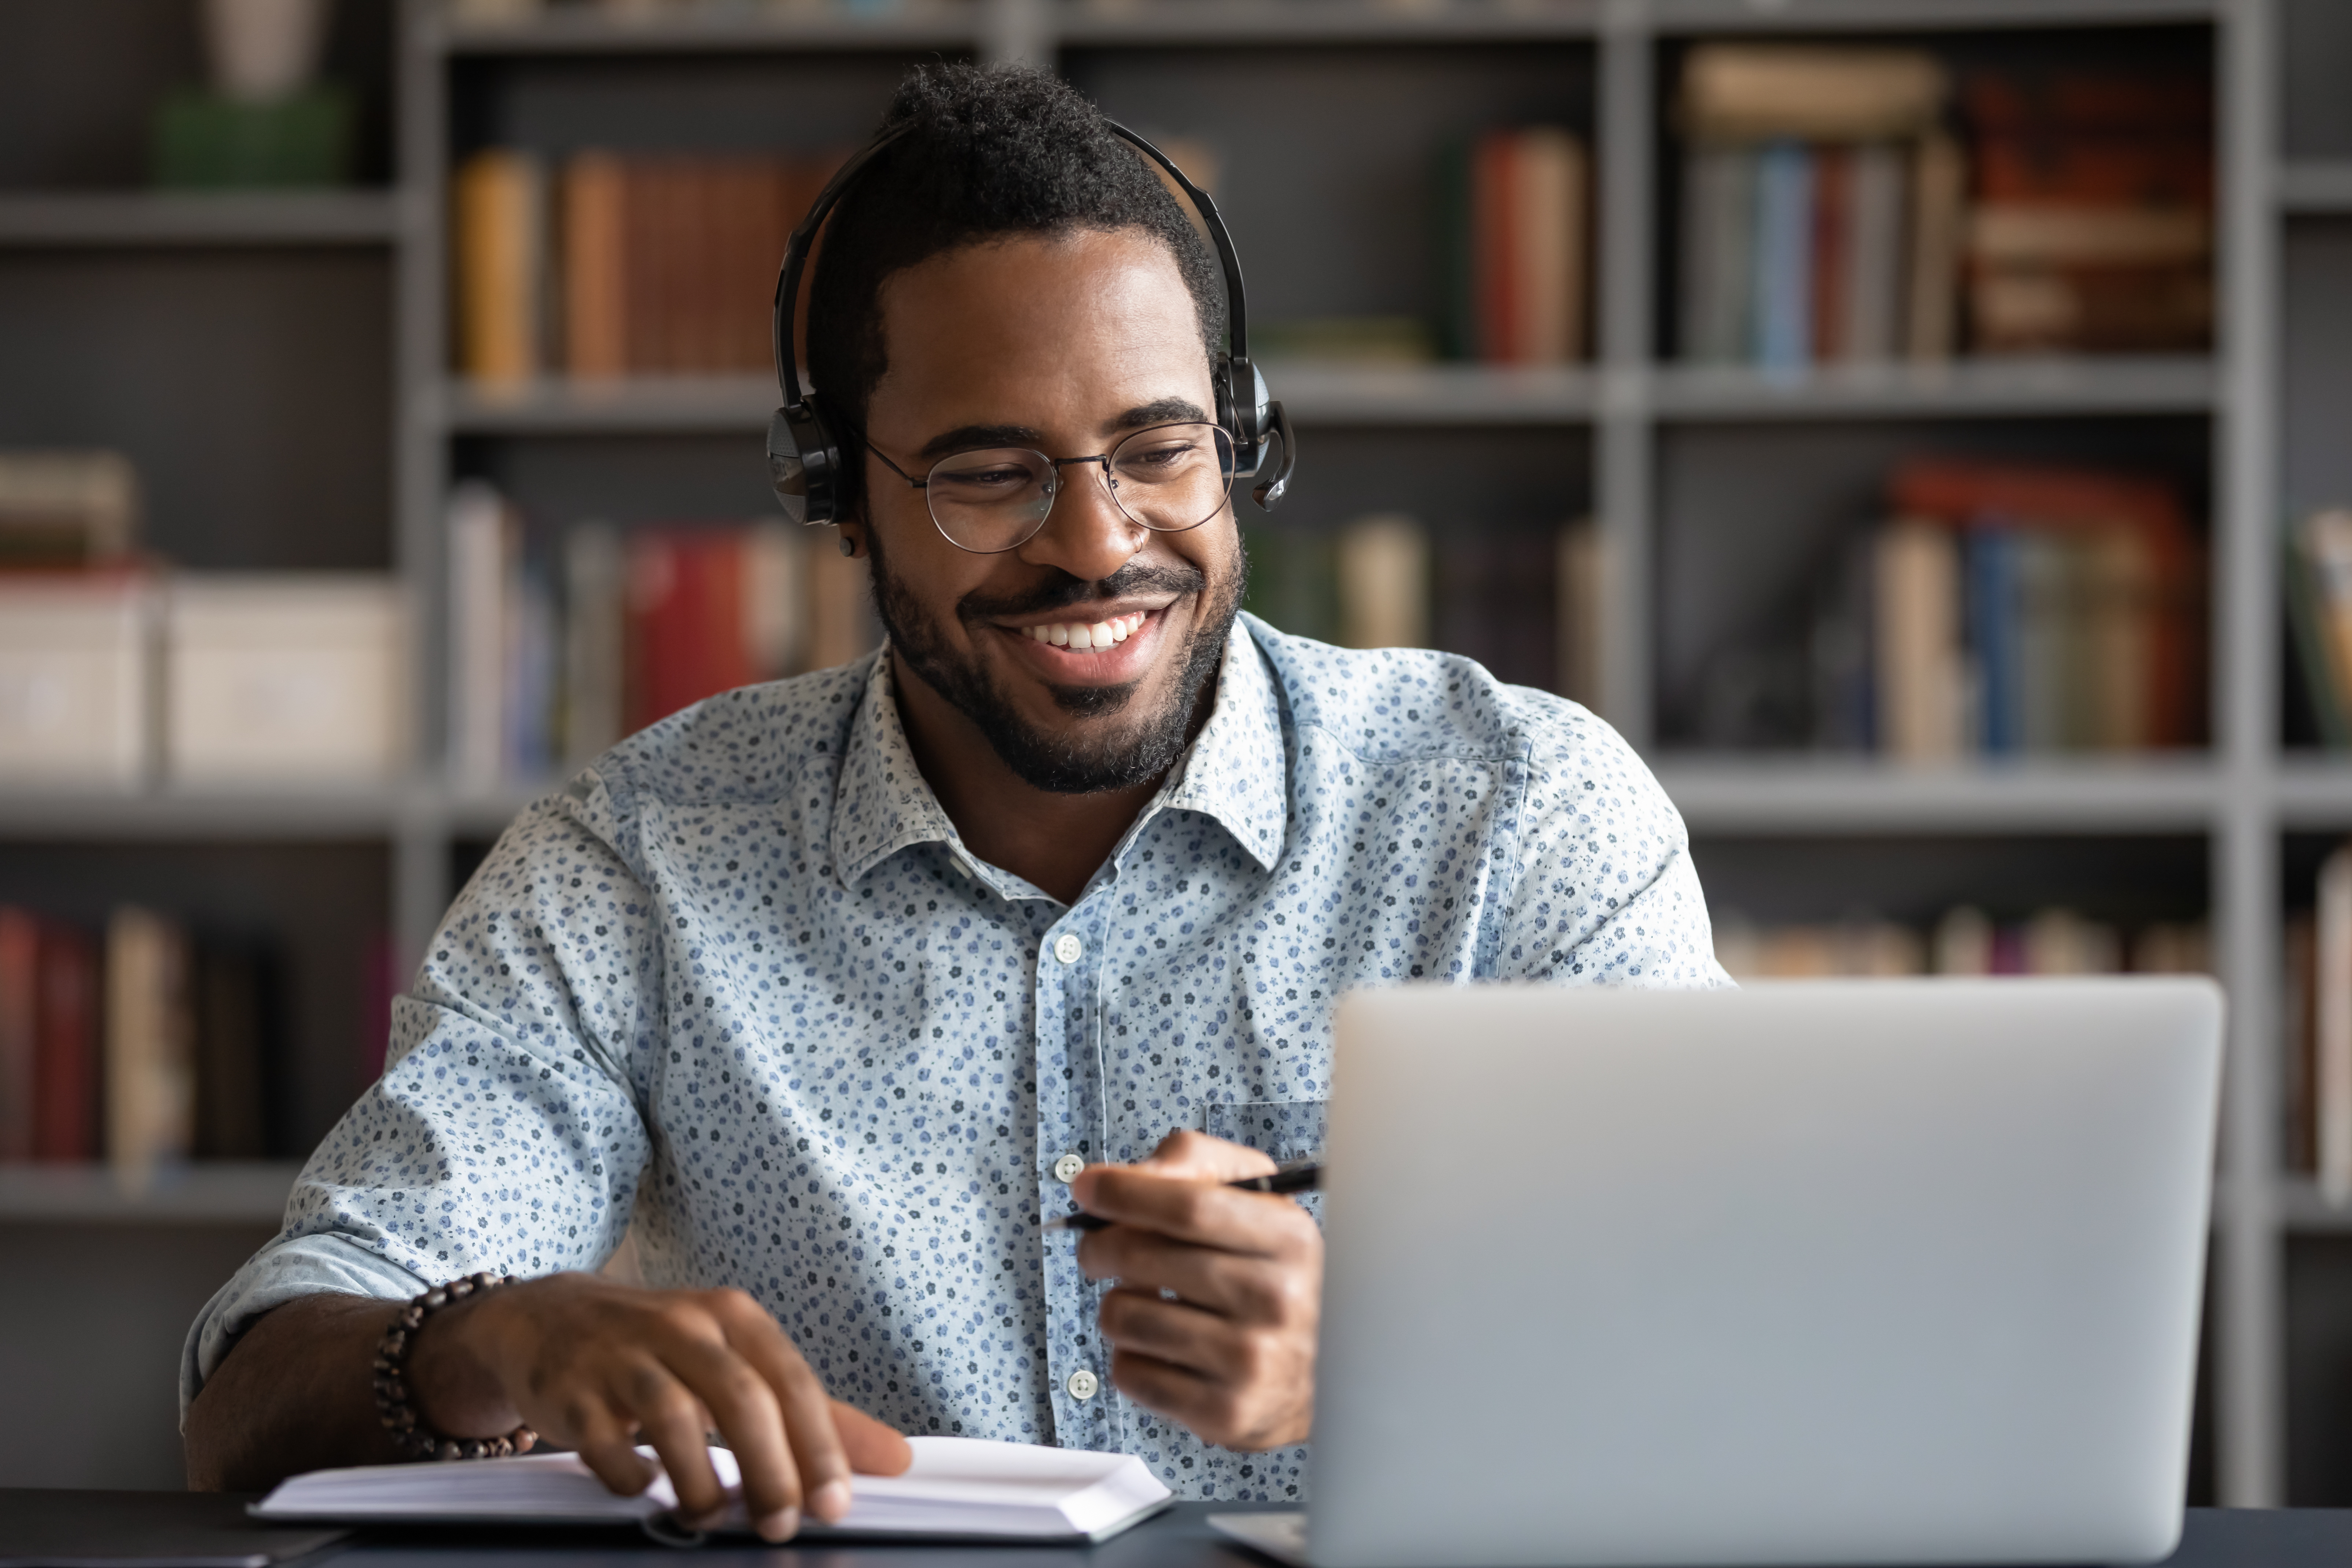 Image of a Black, professional man wearing headphones and smiling at a laptop while making notes with a pen